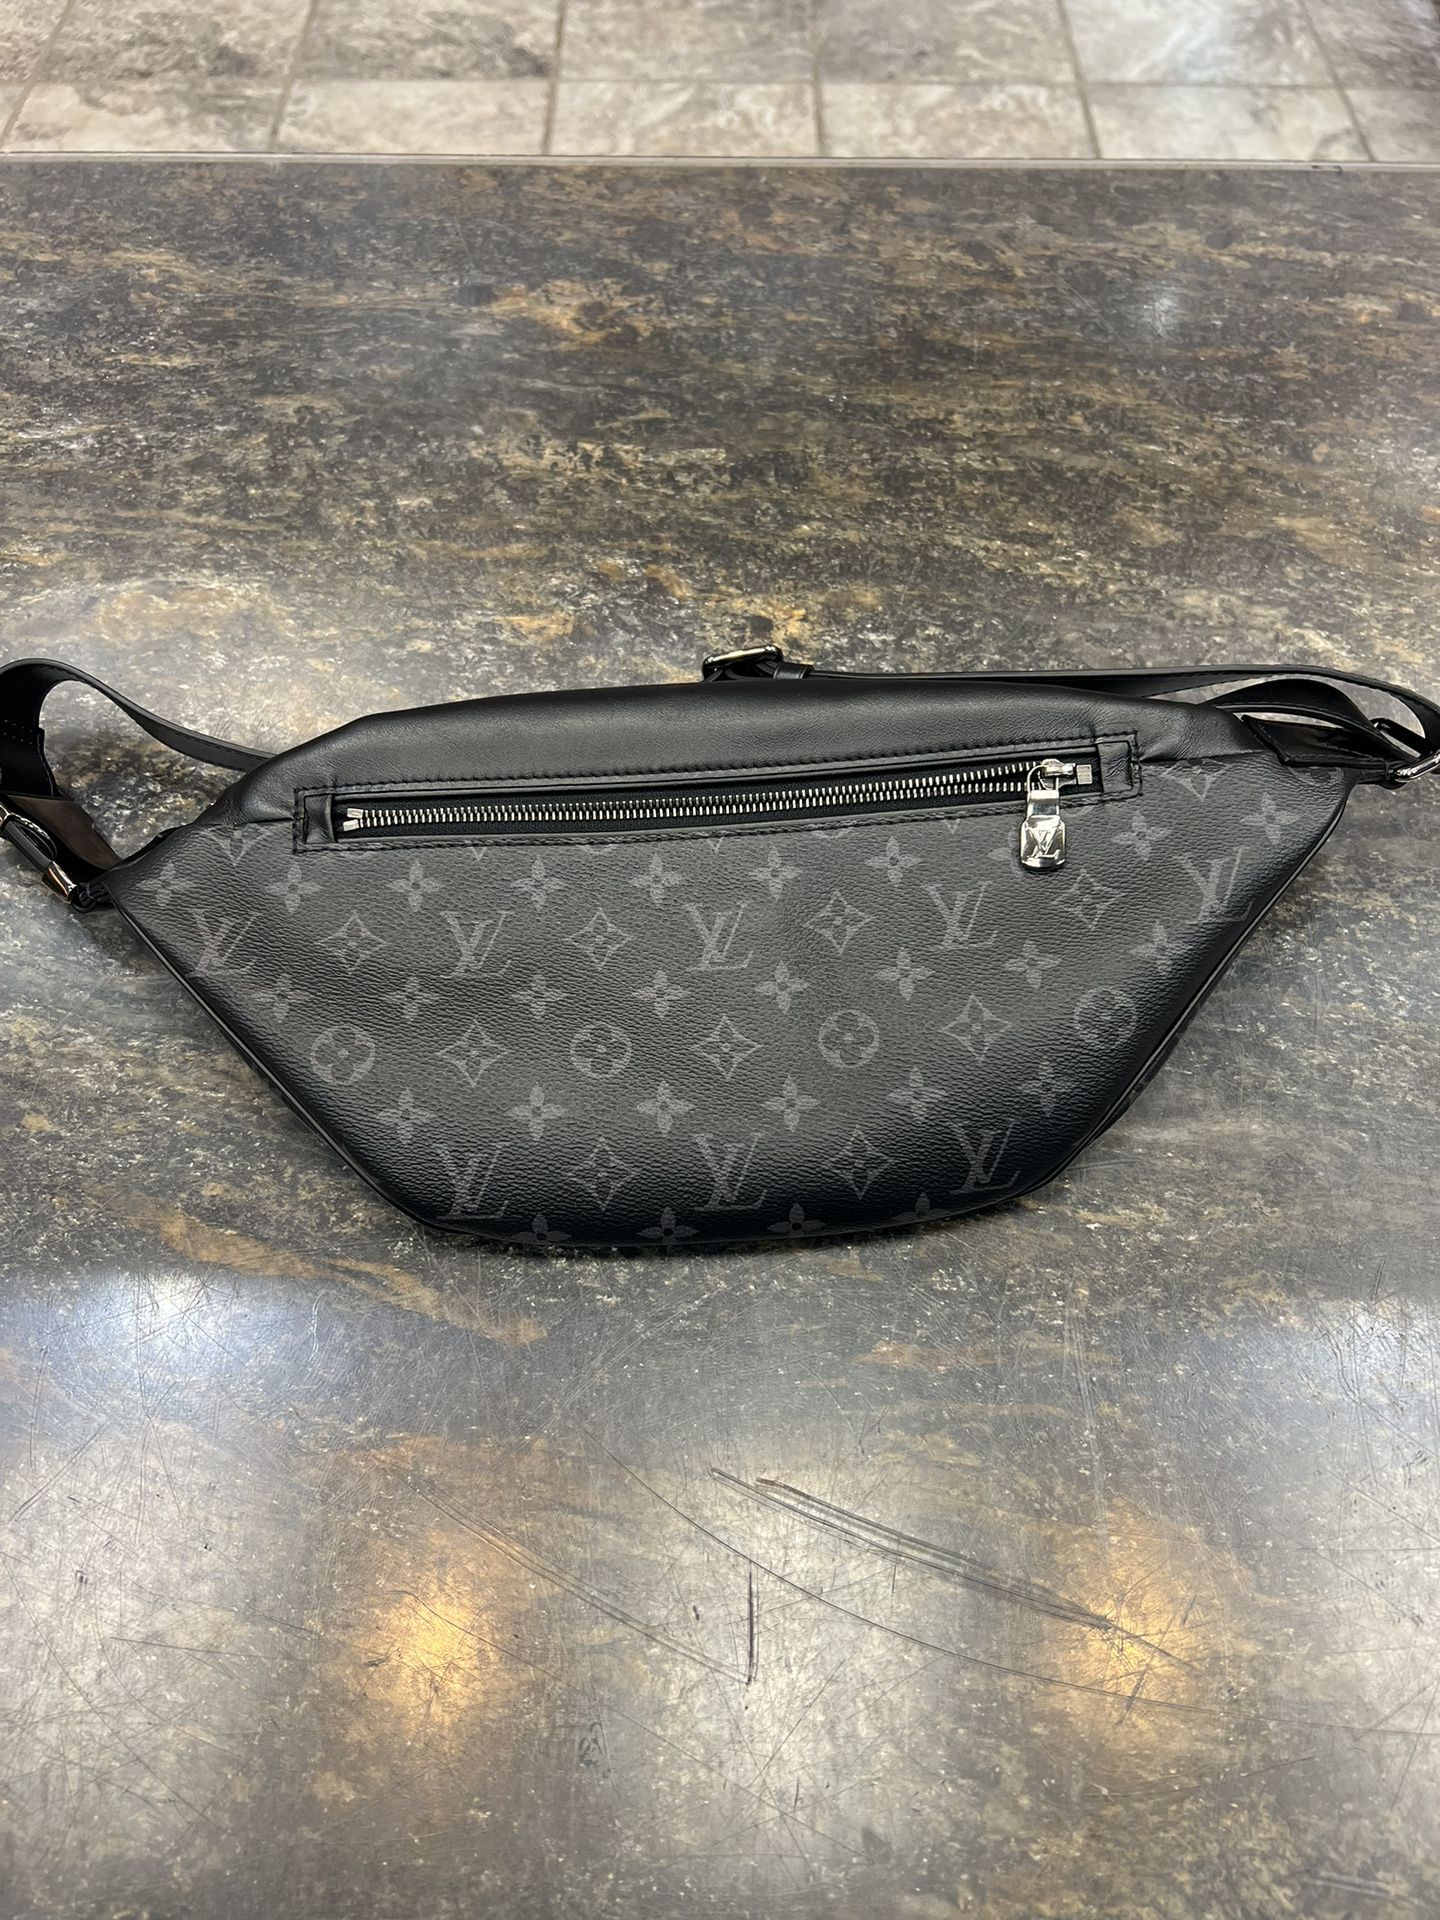 Buy [Used] LOUIS VUITTON Discovery Bum Bag PM Body Bag Monogram Eclipse  M46035 from Japan - Buy authentic Plus exclusive items from Japan